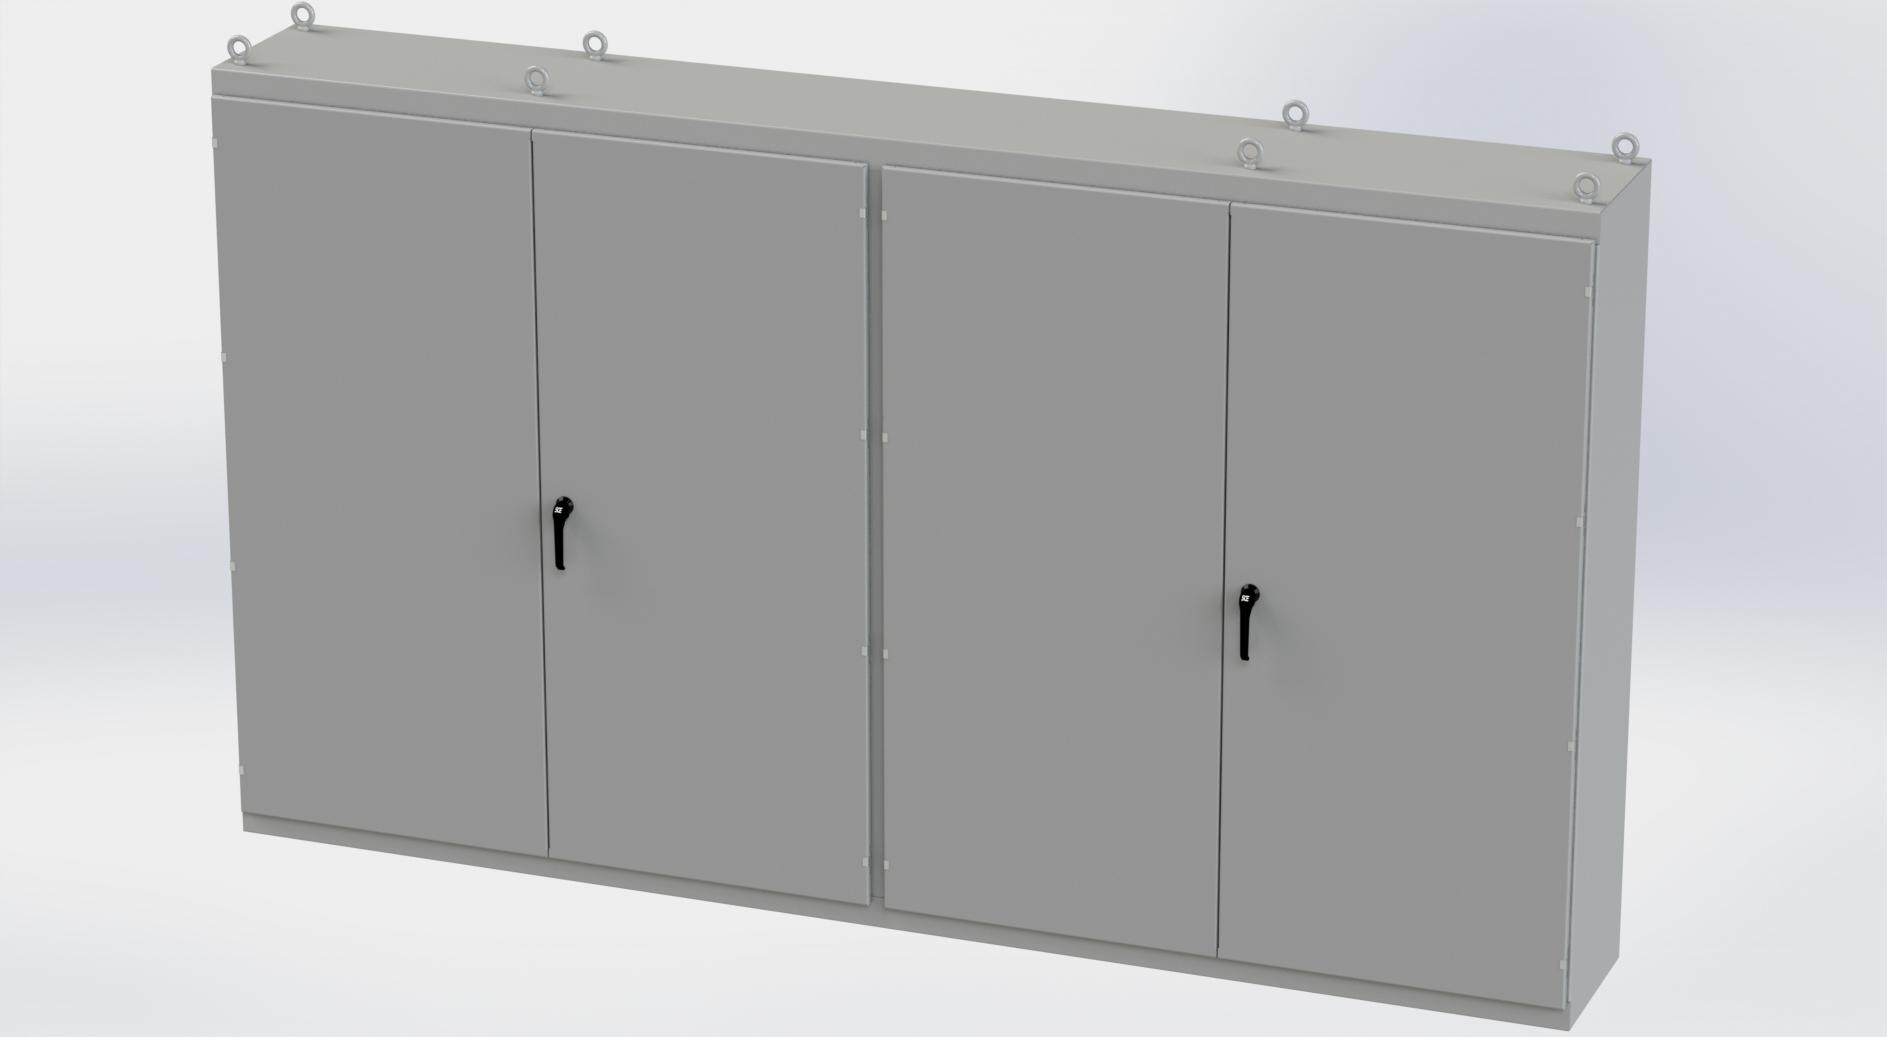 Saginaw Control SCE-86M4E20 Enclosure, Multi-Door, Height:86.00", Width:149.19", Depth:20.00", ANSI-61 gray powder coating inside and out. Sub-panels are powder coated white.